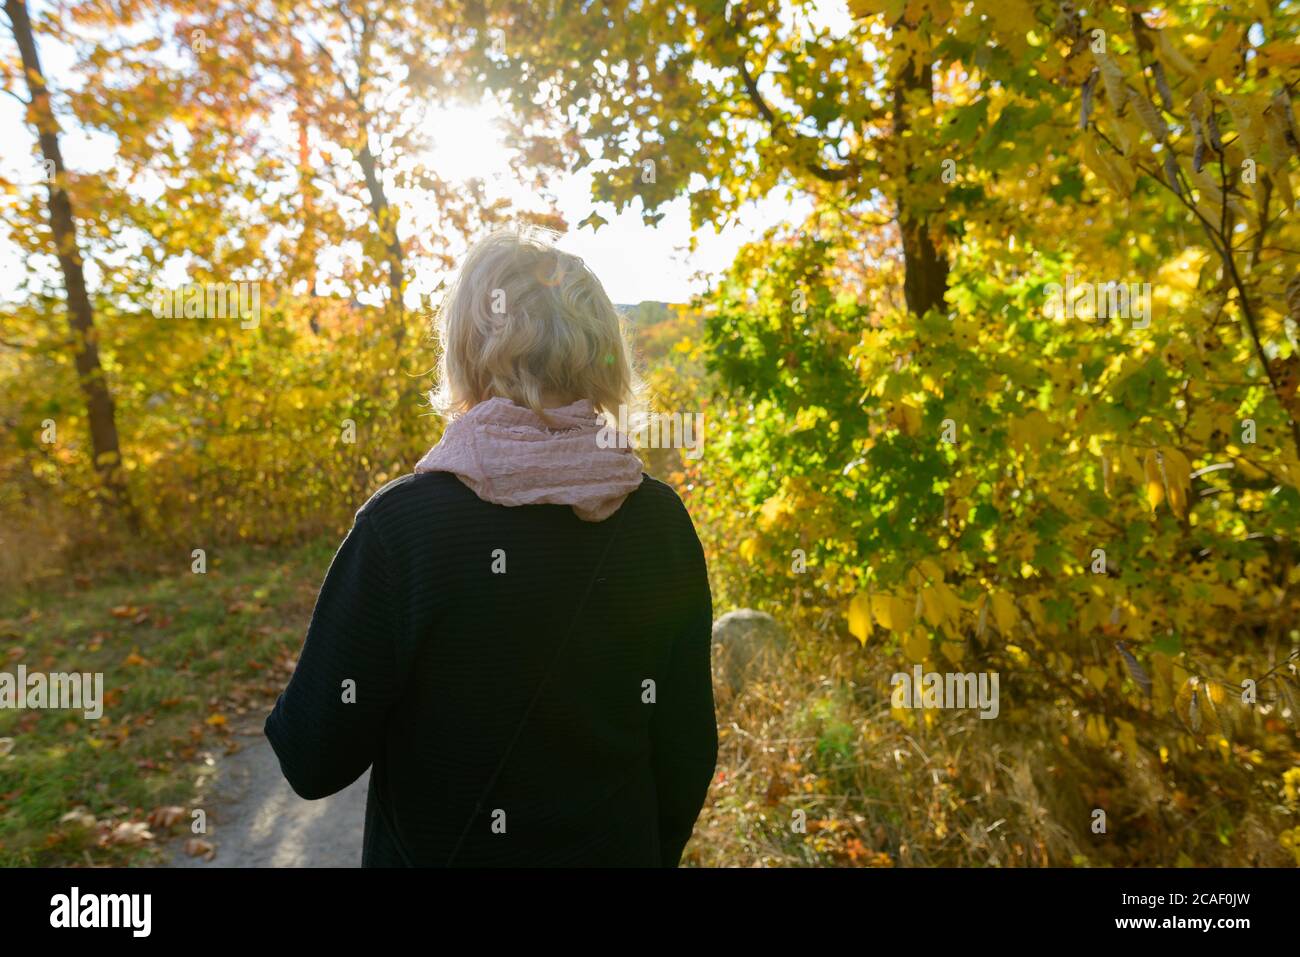 Back view of senior woman on pathway with young autumn trees and sunrays beaming through the leaves in the forest Stock Photo